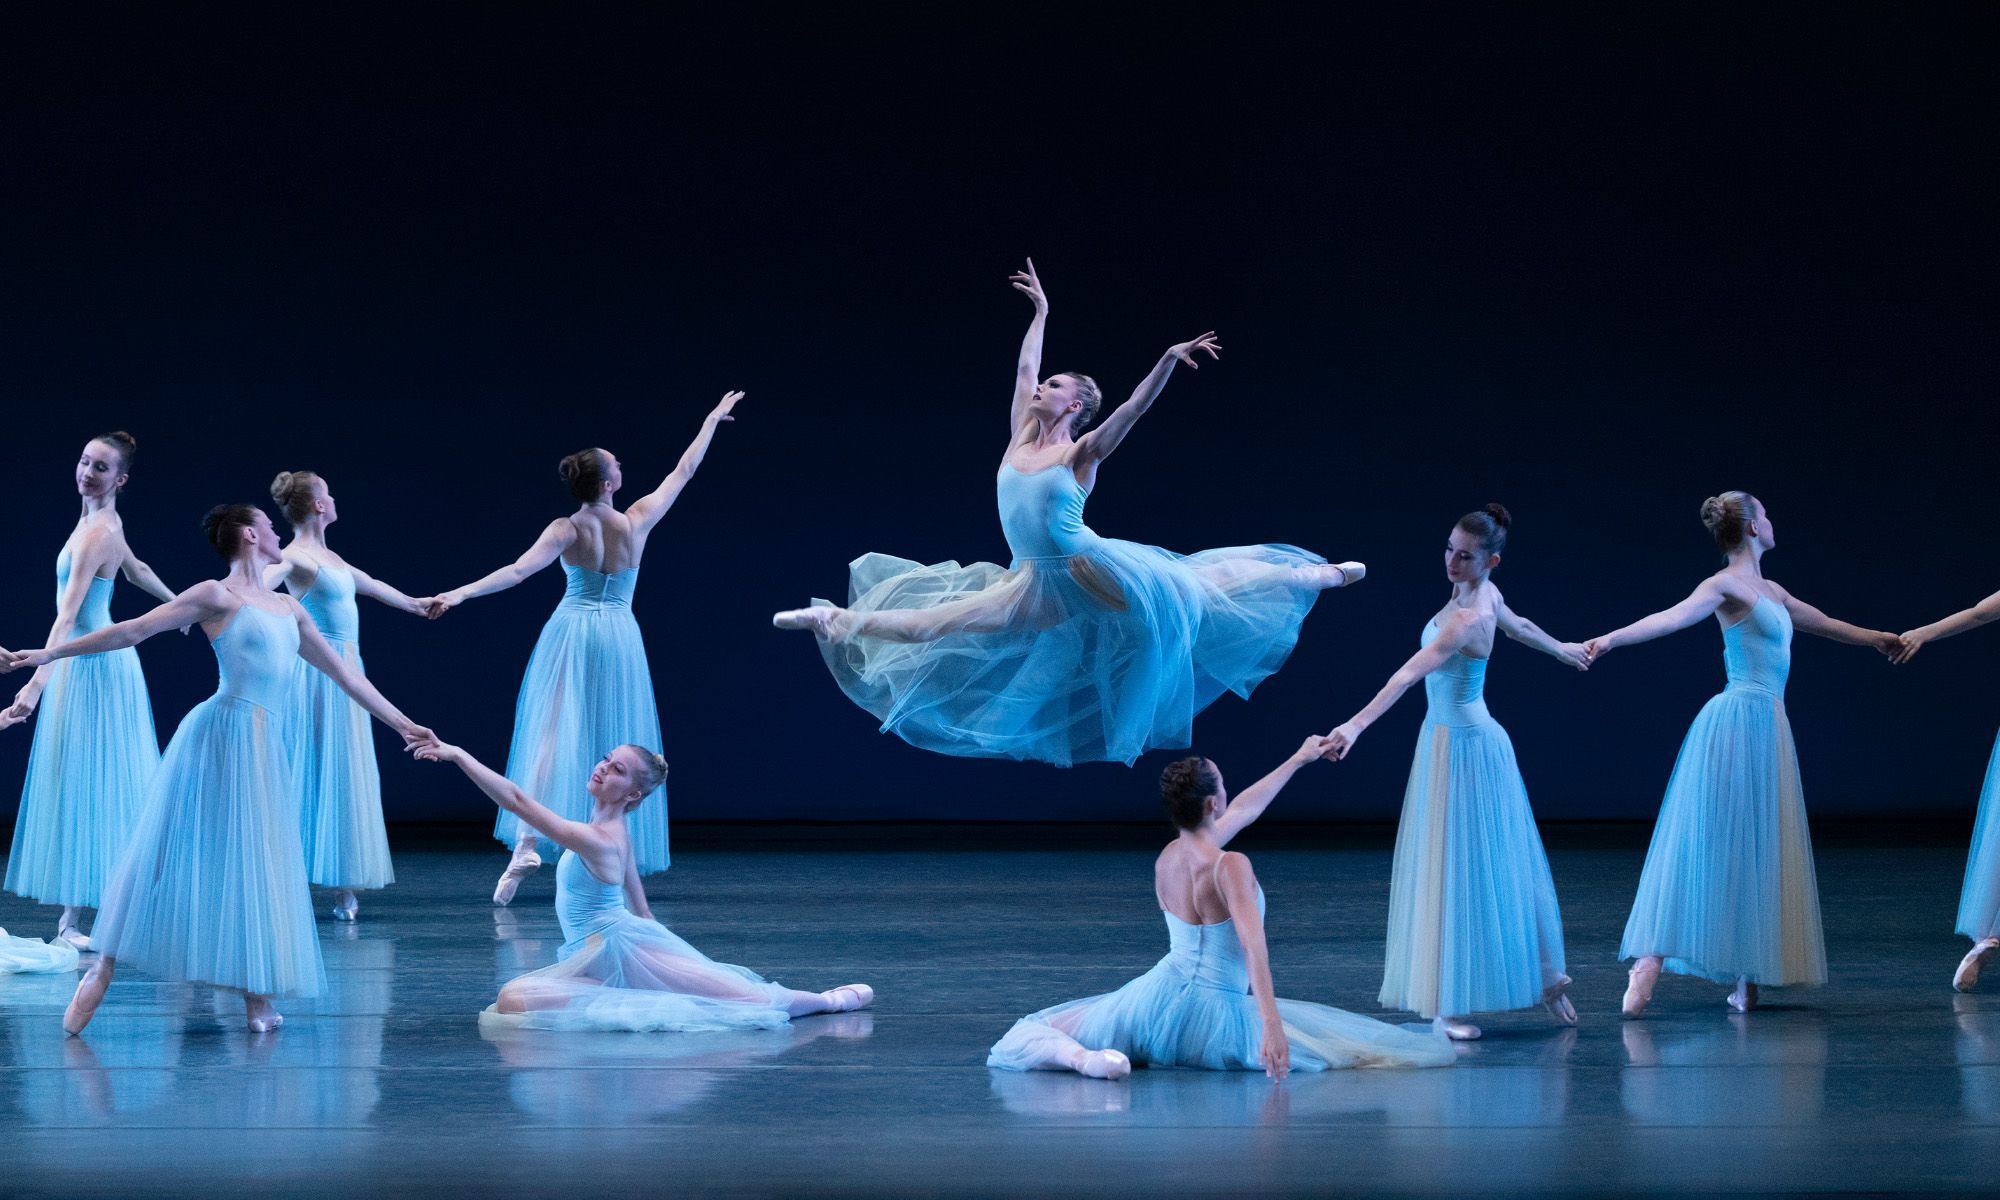 A group of ballerinas perform on stage holding hands as they circle one dancer. The dancer in the middle is mid-jump.